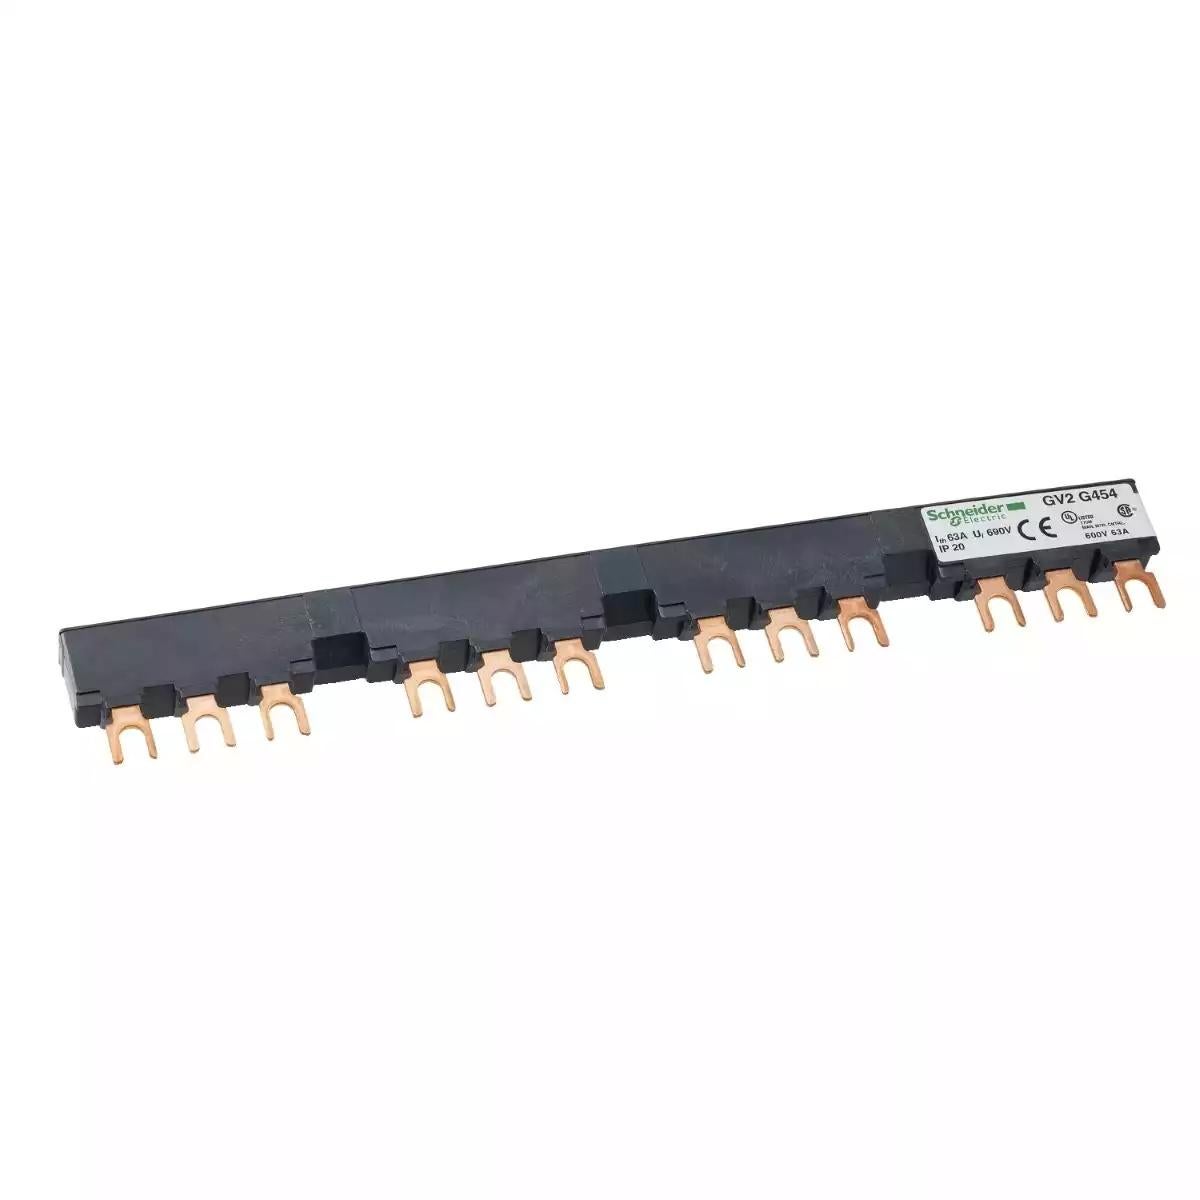 Linergy FT - Comb busbar - 63 A - 4 tap-offs - 54 mm pitch